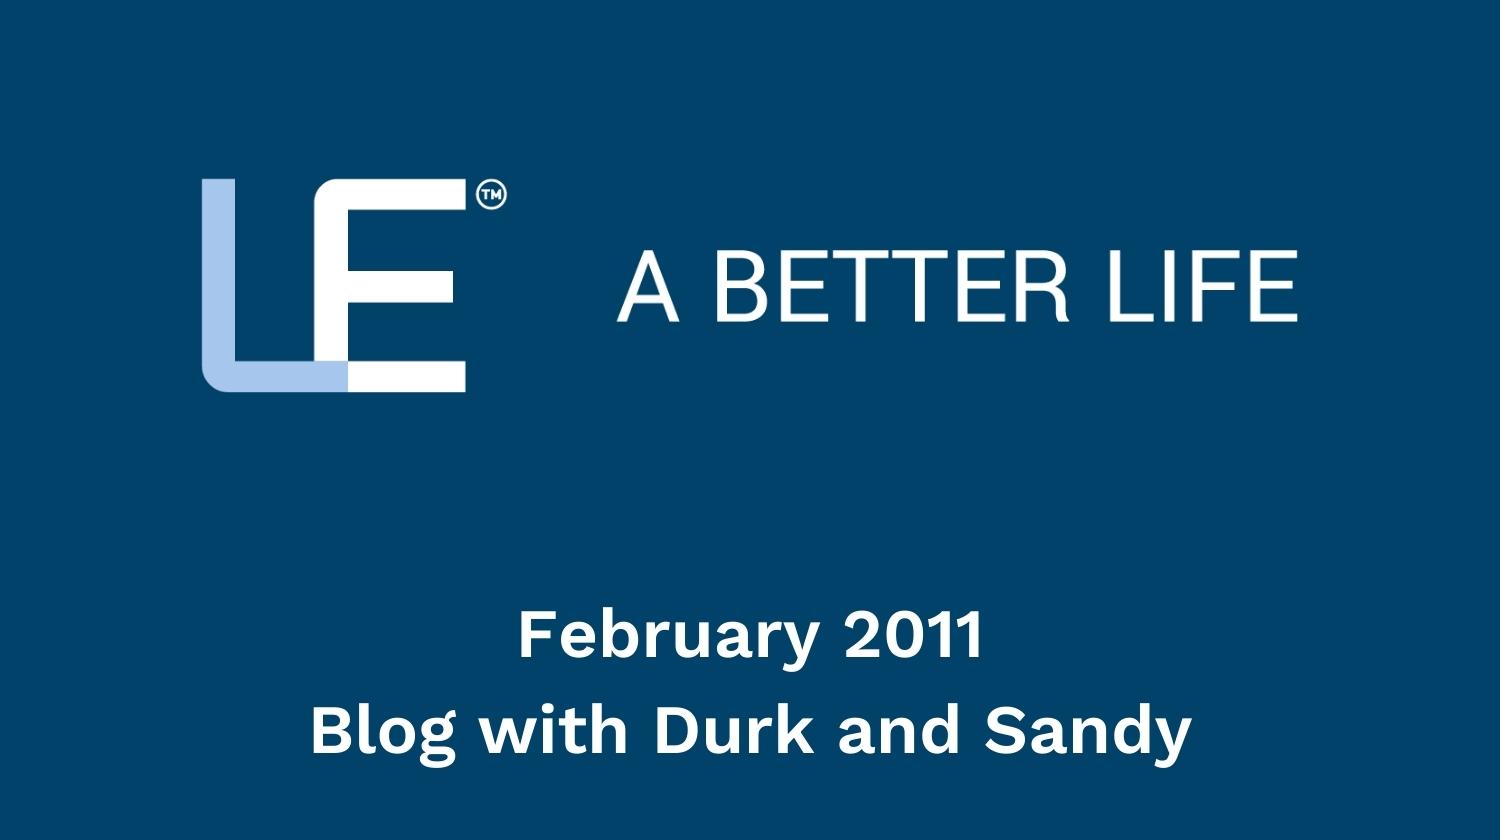 February 2011 Blog with Durk and Sandy